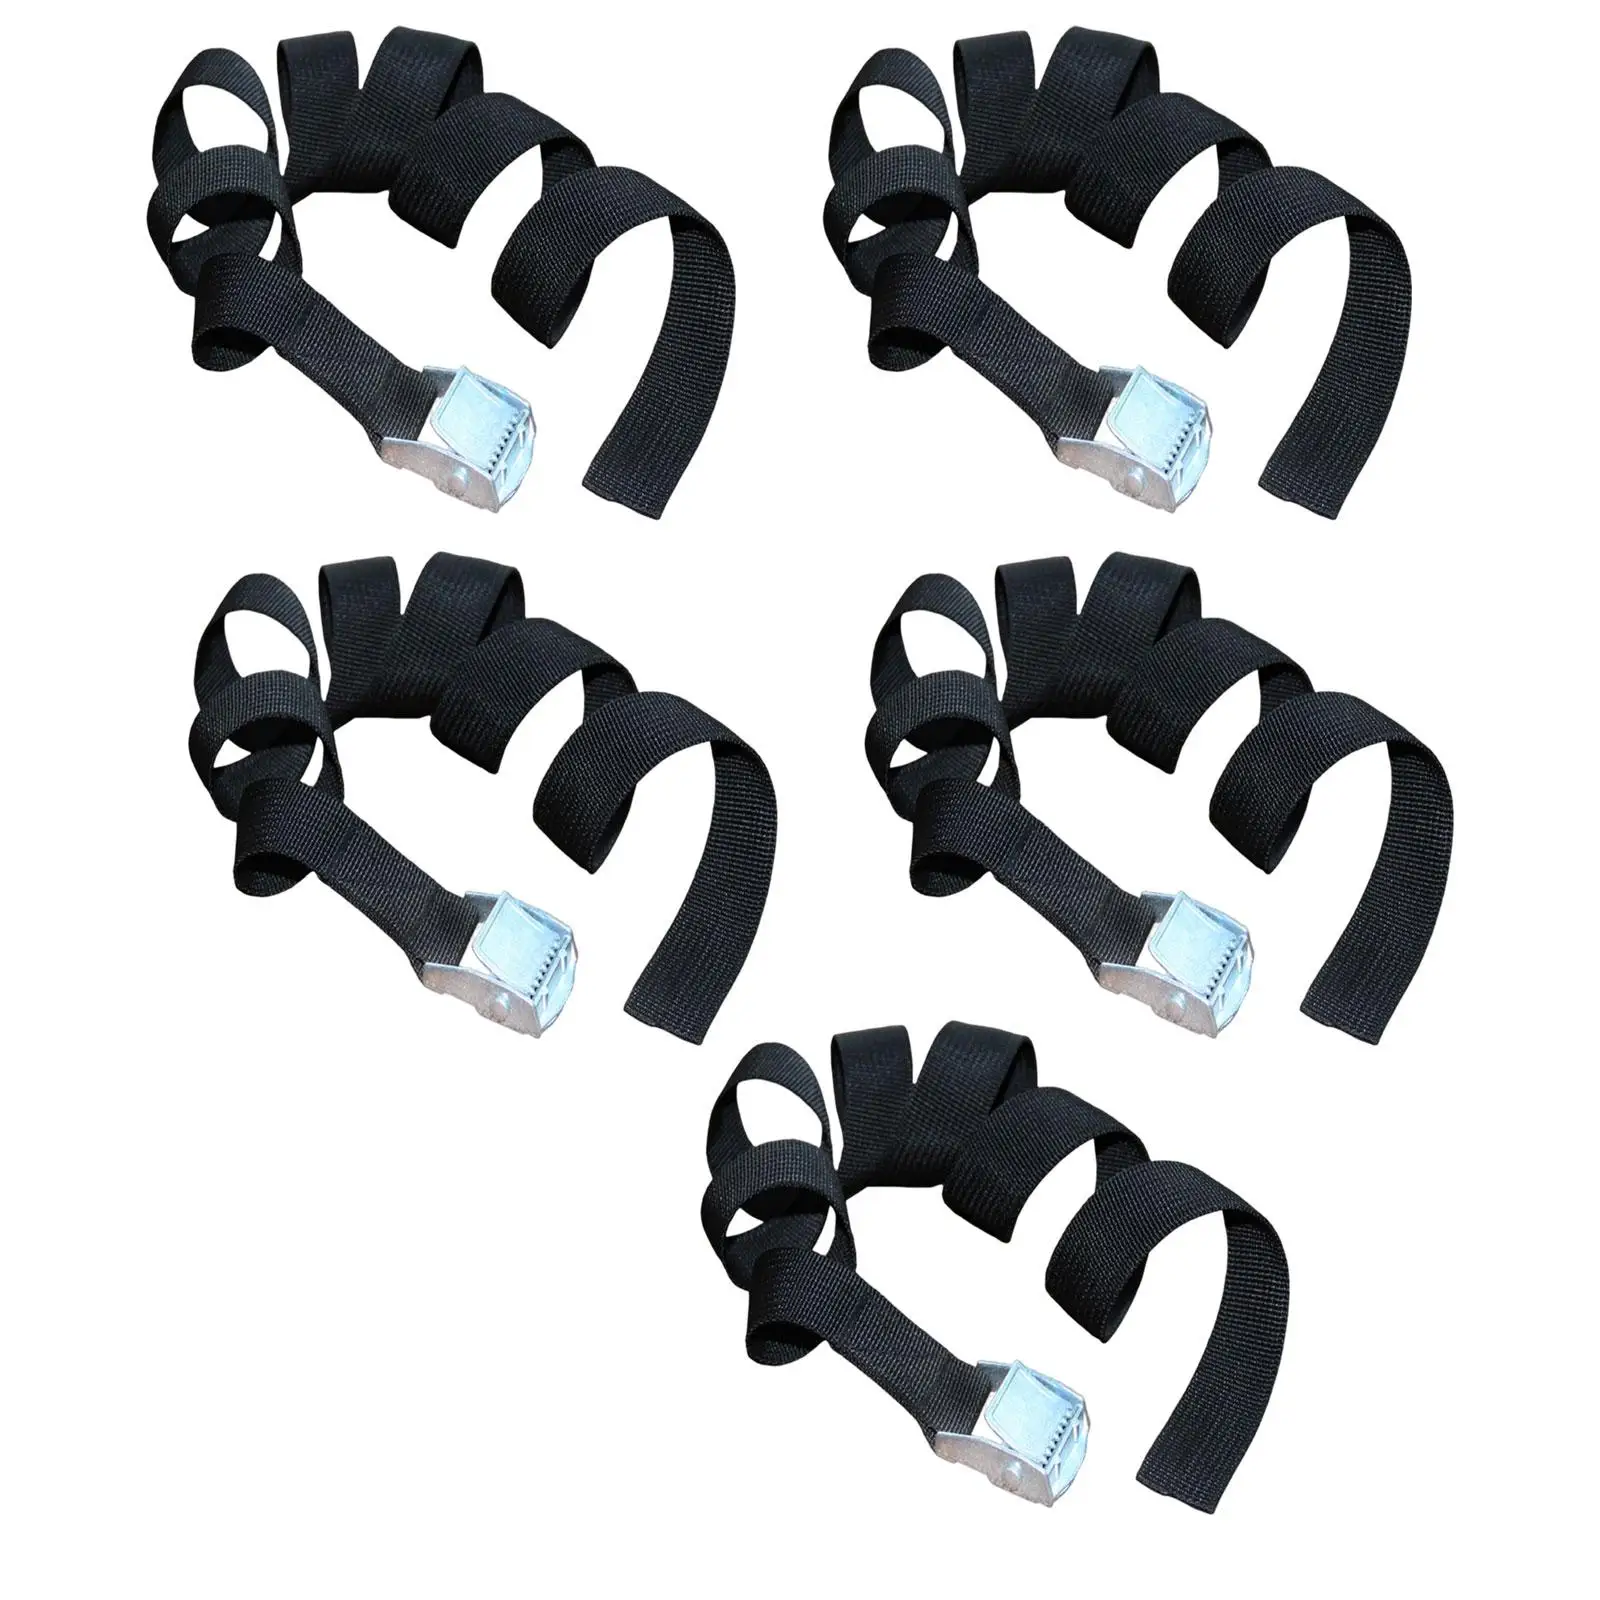 5x Tie Down Straps Zinc Alloy Press Buckle Lashing Straps for Fixing